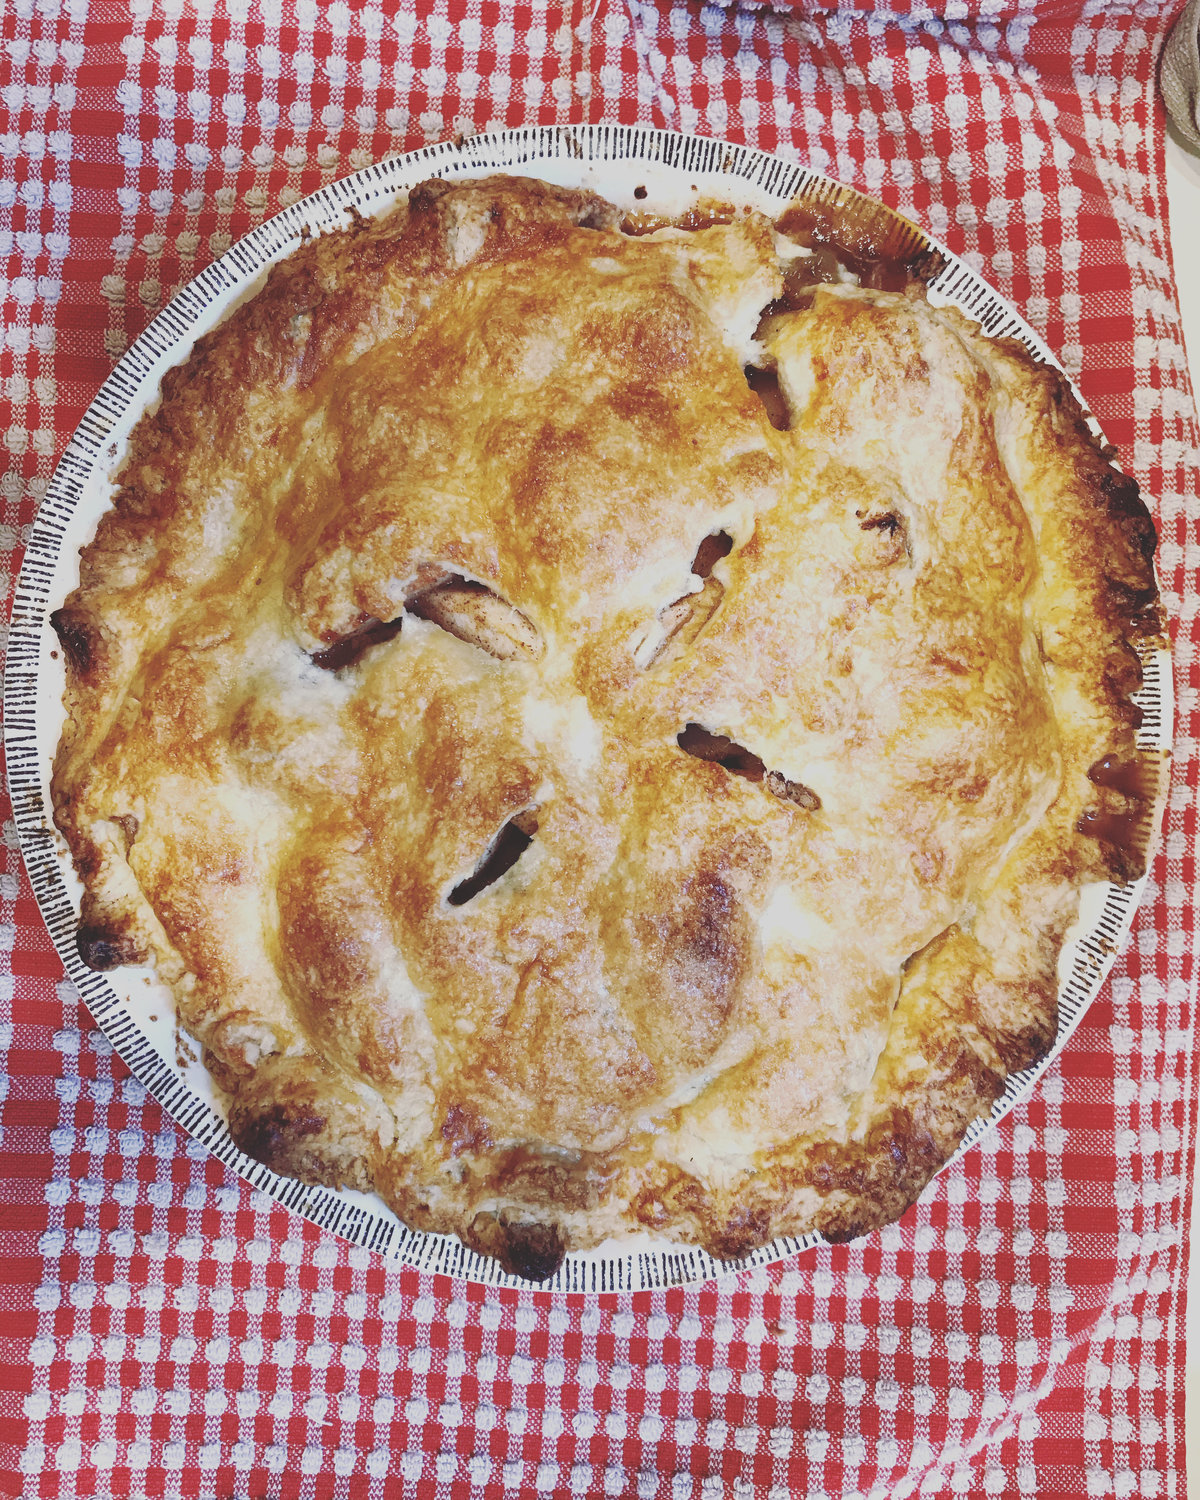 This apple pie was baked by my youngest last year, when he was studying culinary arts in high school. Now he’s a college freshman, studying auto mechanics—but he still loves to cook.